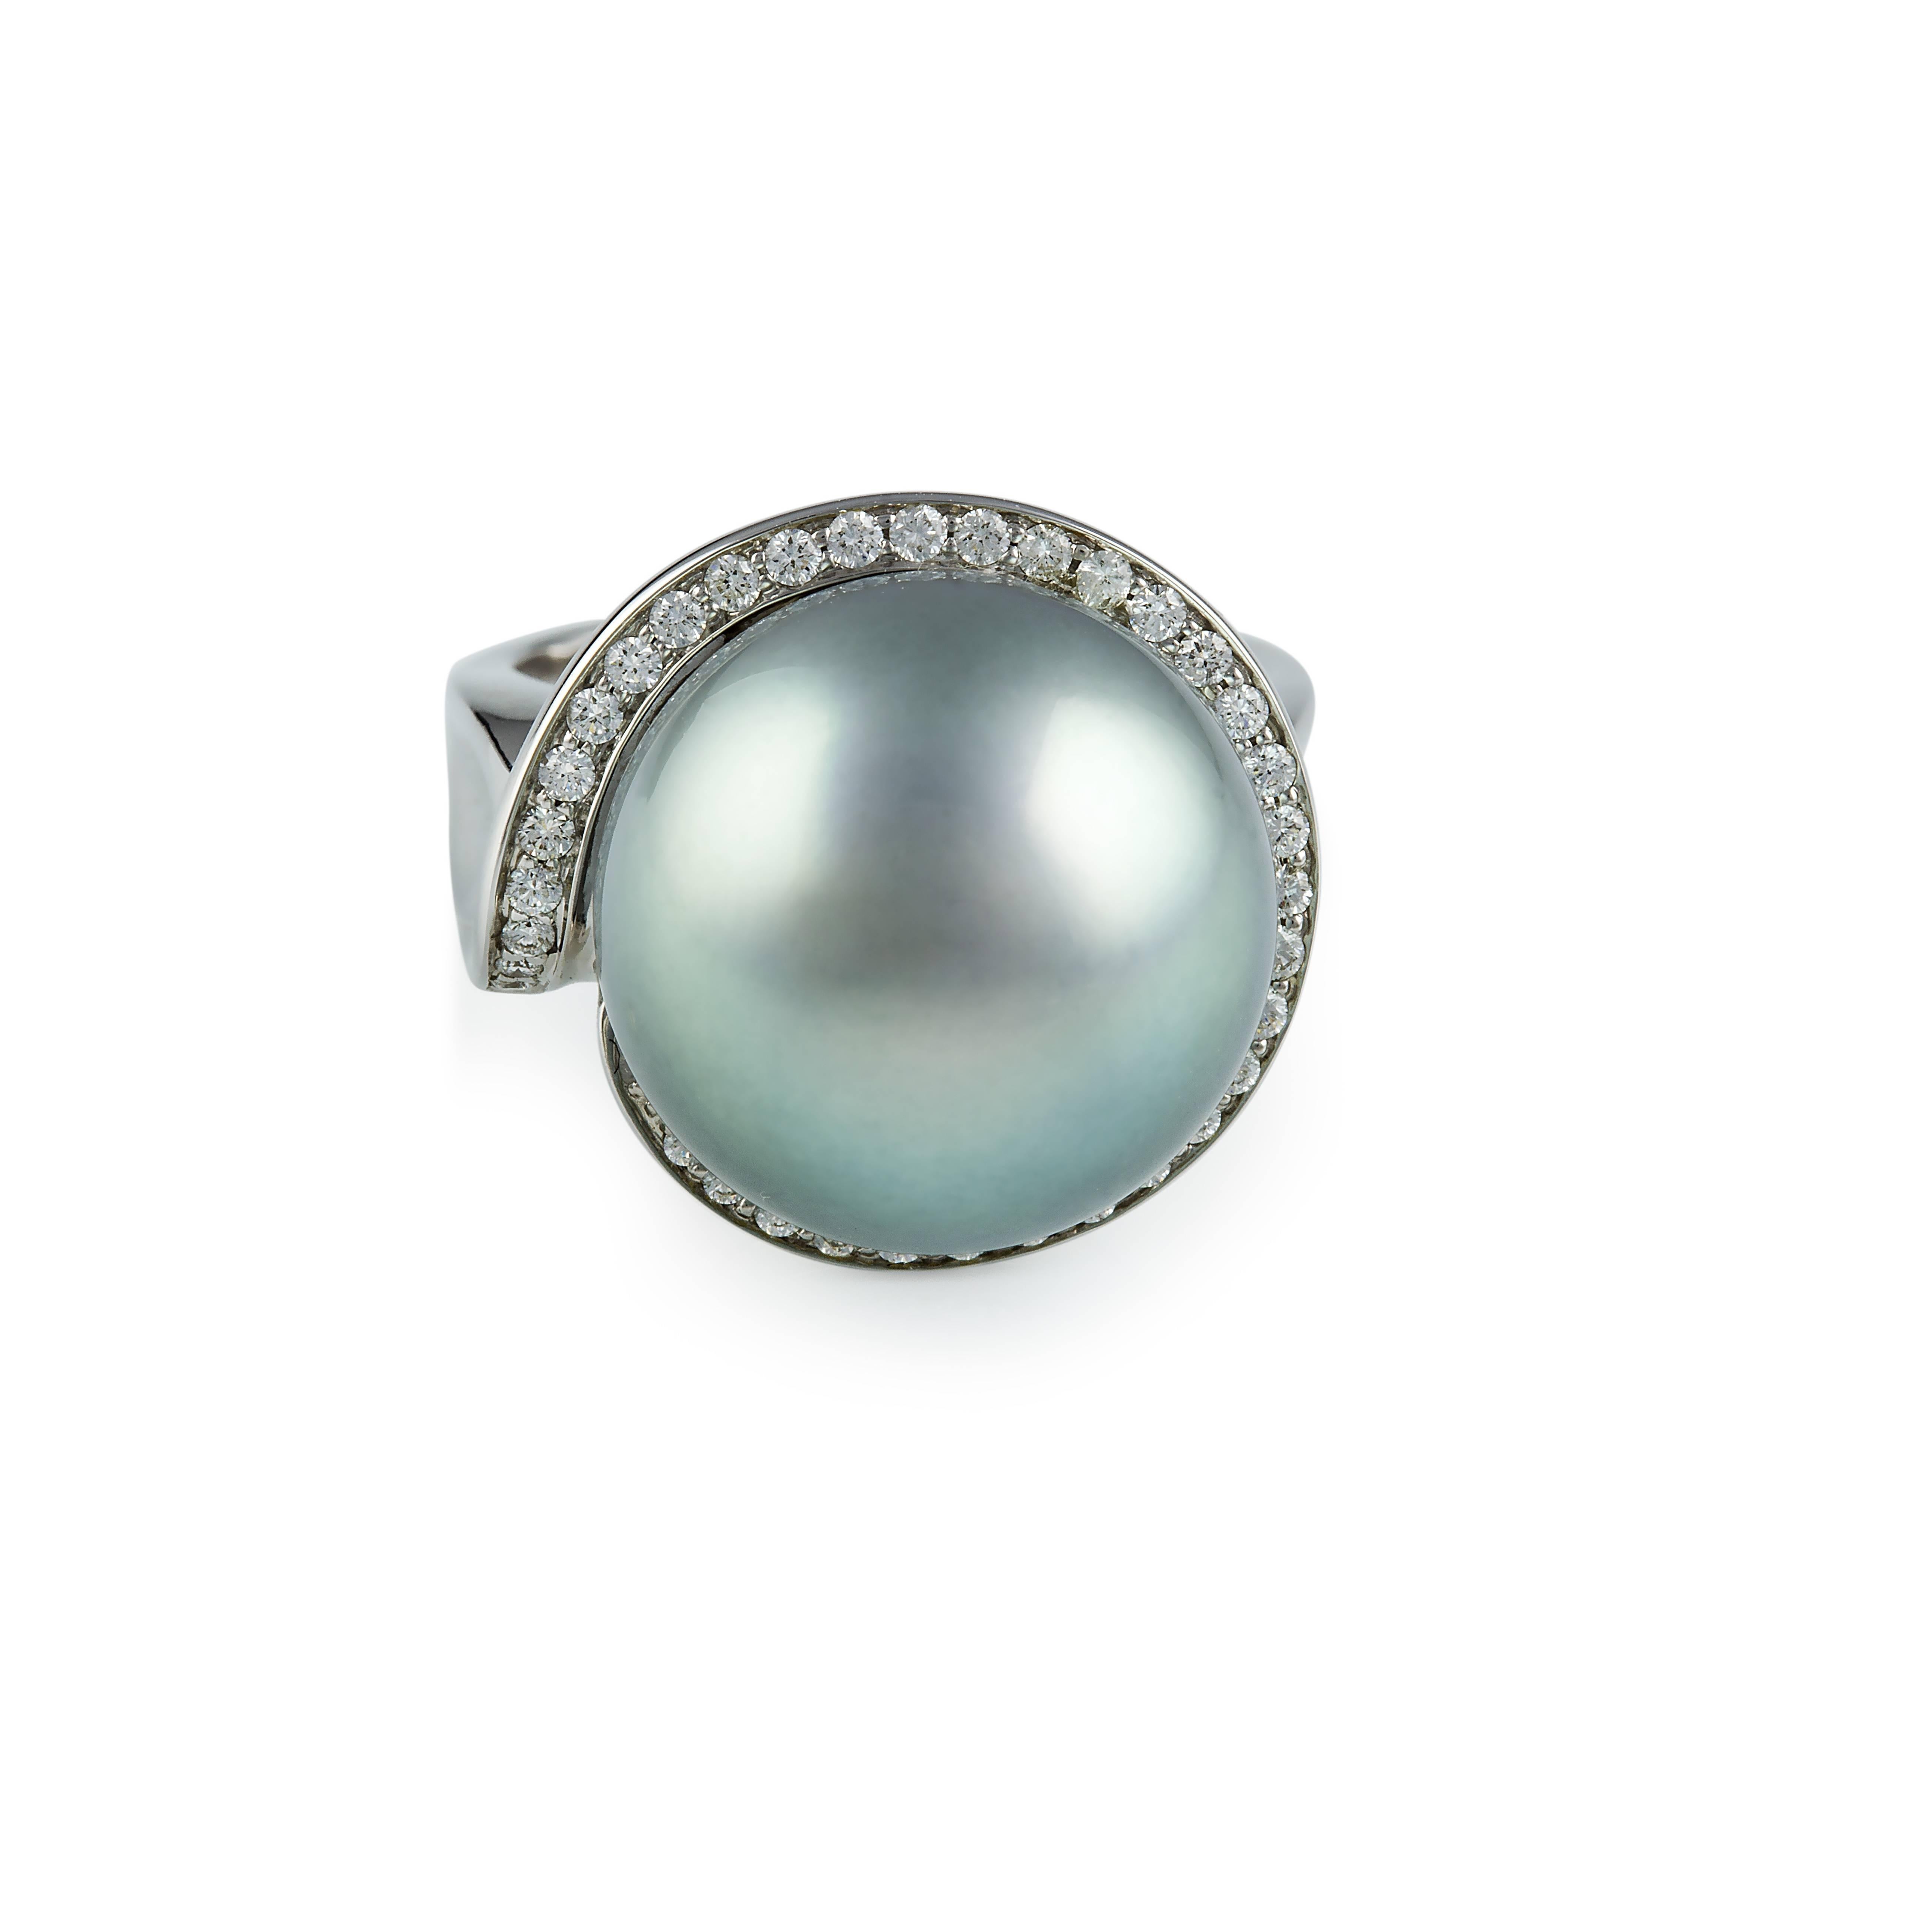 18ct white gold sold ring encircled with 0.31ct G/Si diamonds with a 15.9mm, round, high quality, light blue grey, Tahitian South Sea pearl...

This fabulous large ring sits perfectly snug on the finger with a solid band and the pearl sitting 2/3rds